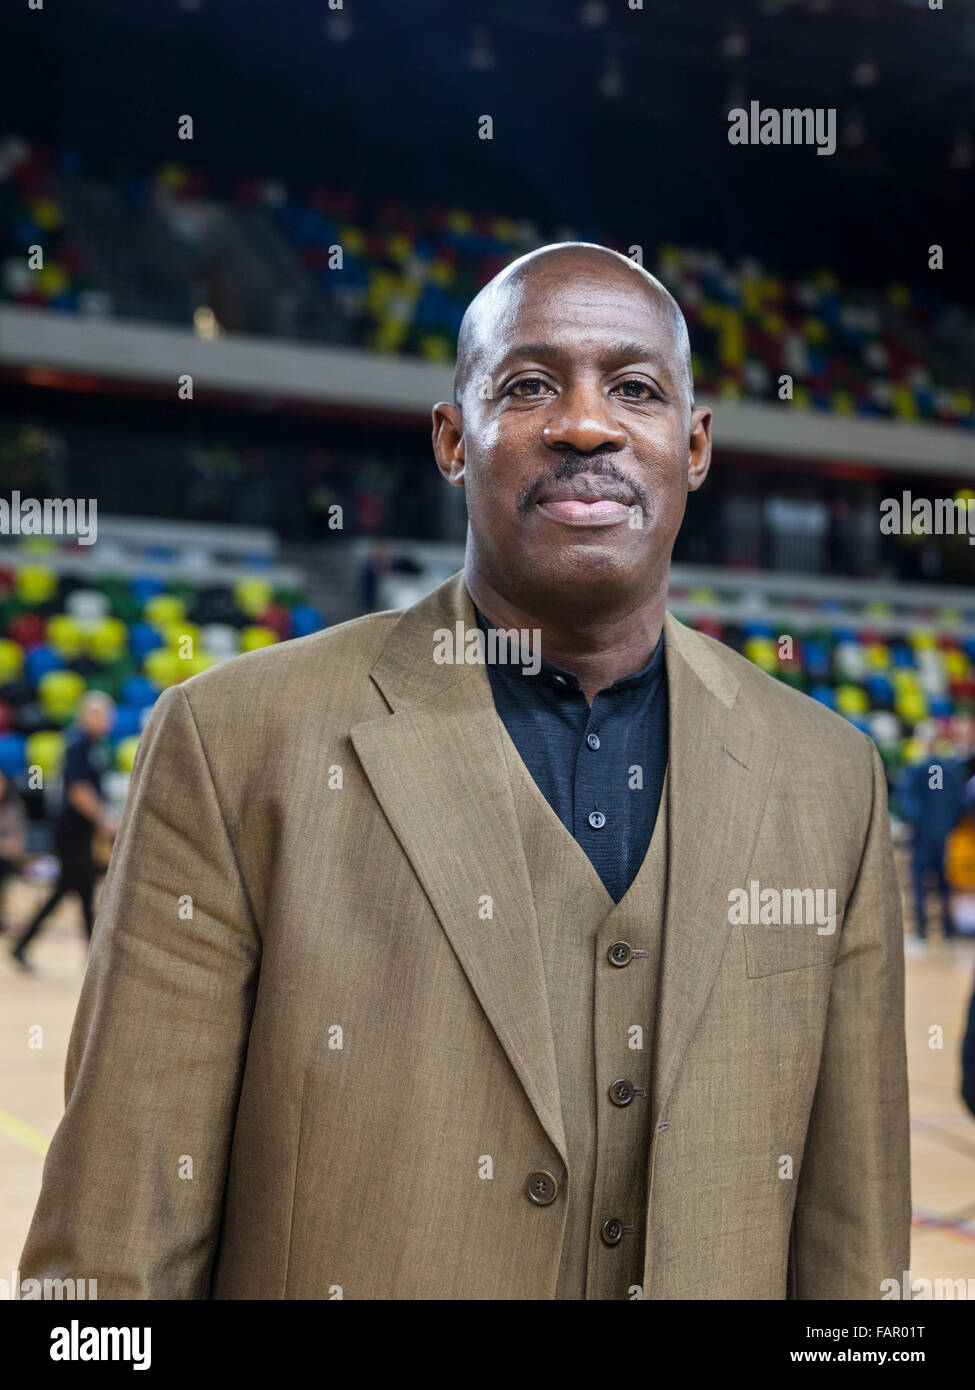 London, UK. 3rd January 2016. London Lions head coach Nigel Lloyd is happy about the win after the London Lions vs. Plymouth Raiders BBL game at the Copper Box Arena in the Olympic Park. London Lions win 86-84 Credit:  Imageplotter/Alamy Live News Stock Photo